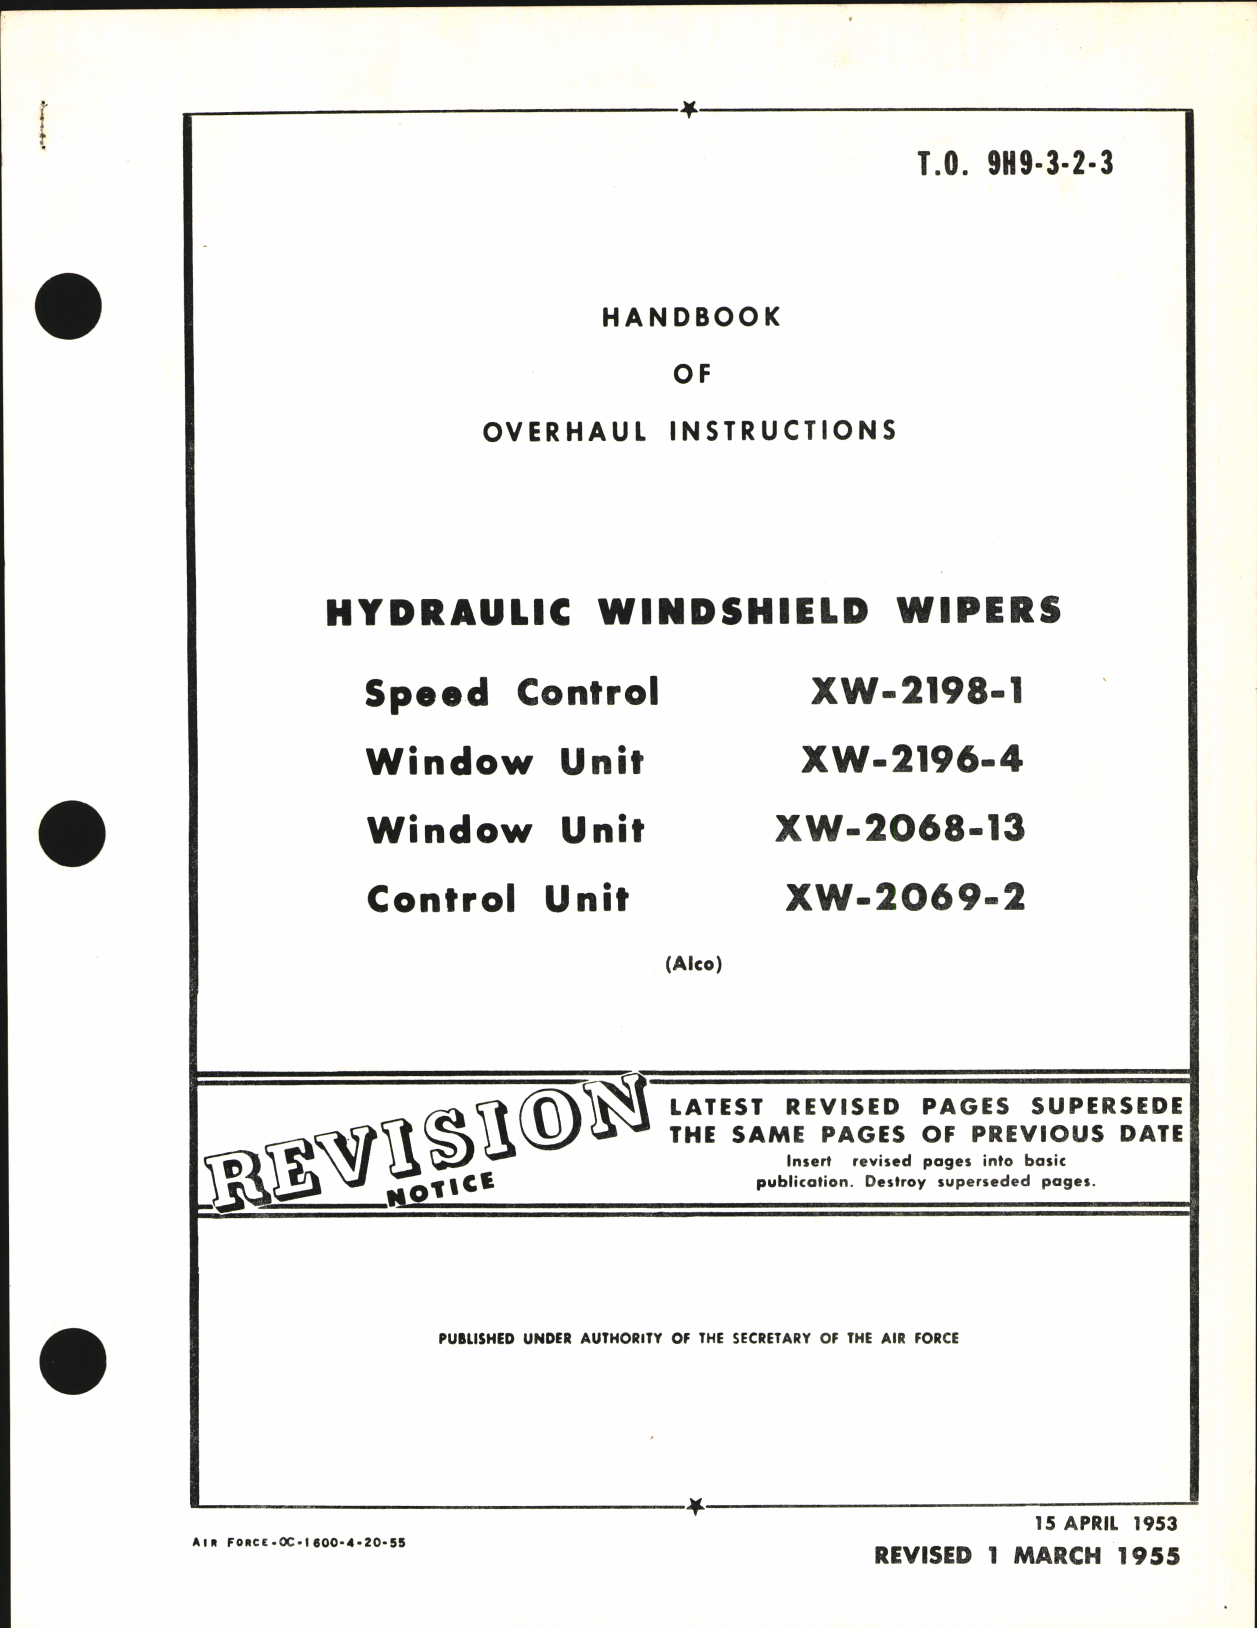 Sample page 1 from AirCorps Library document: Handbook of Overhaul Instructions for Hydraulic Windshield Wipers 